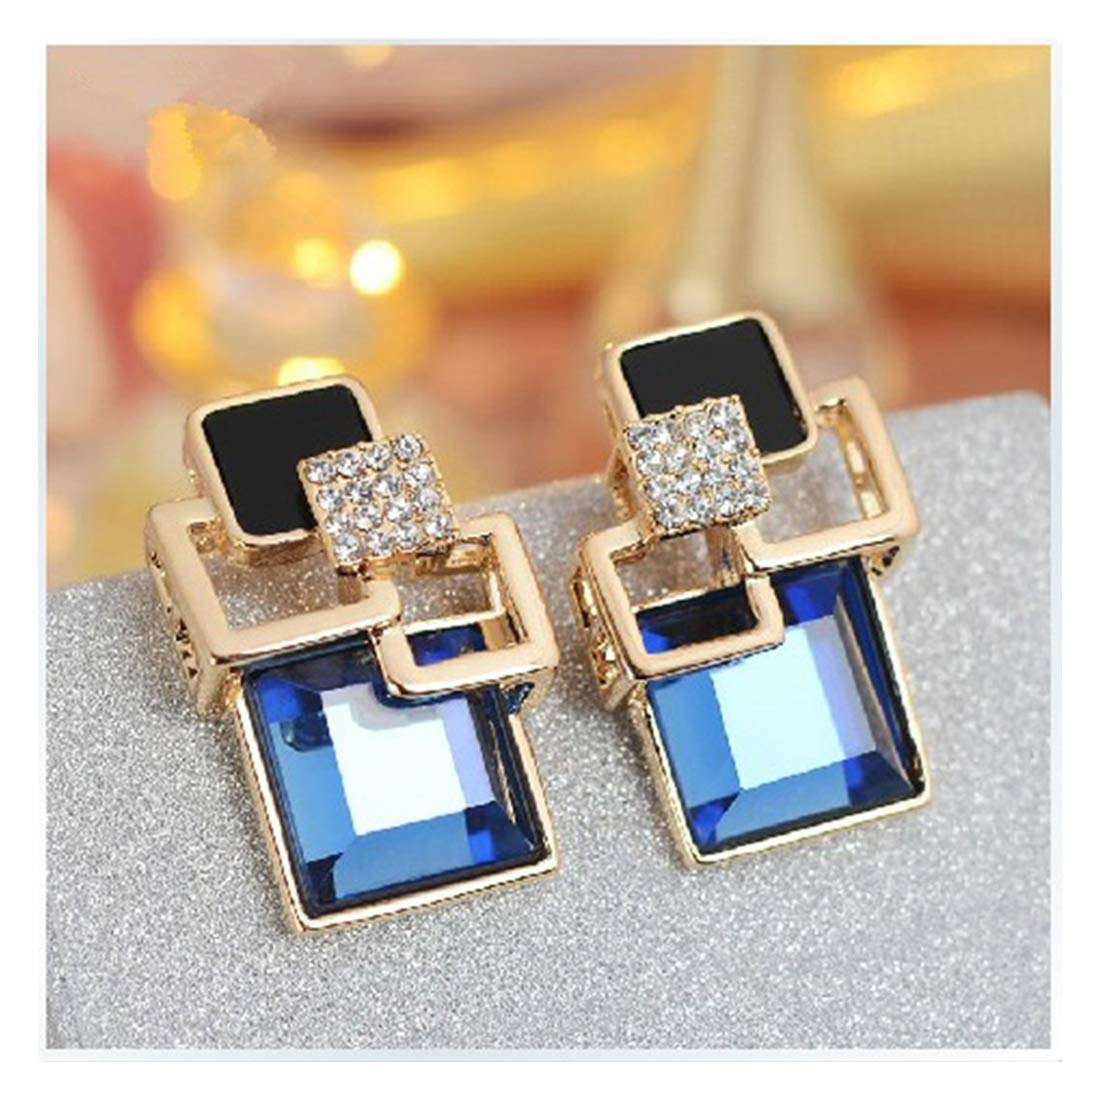 Yellow Chimes Trandy Fine Vintage Long Square Geometric Crystal by Yellow Chimes Gold Plated Drop Earrings for Women (Blue,gold) (YCFJER-275SQR-BL)